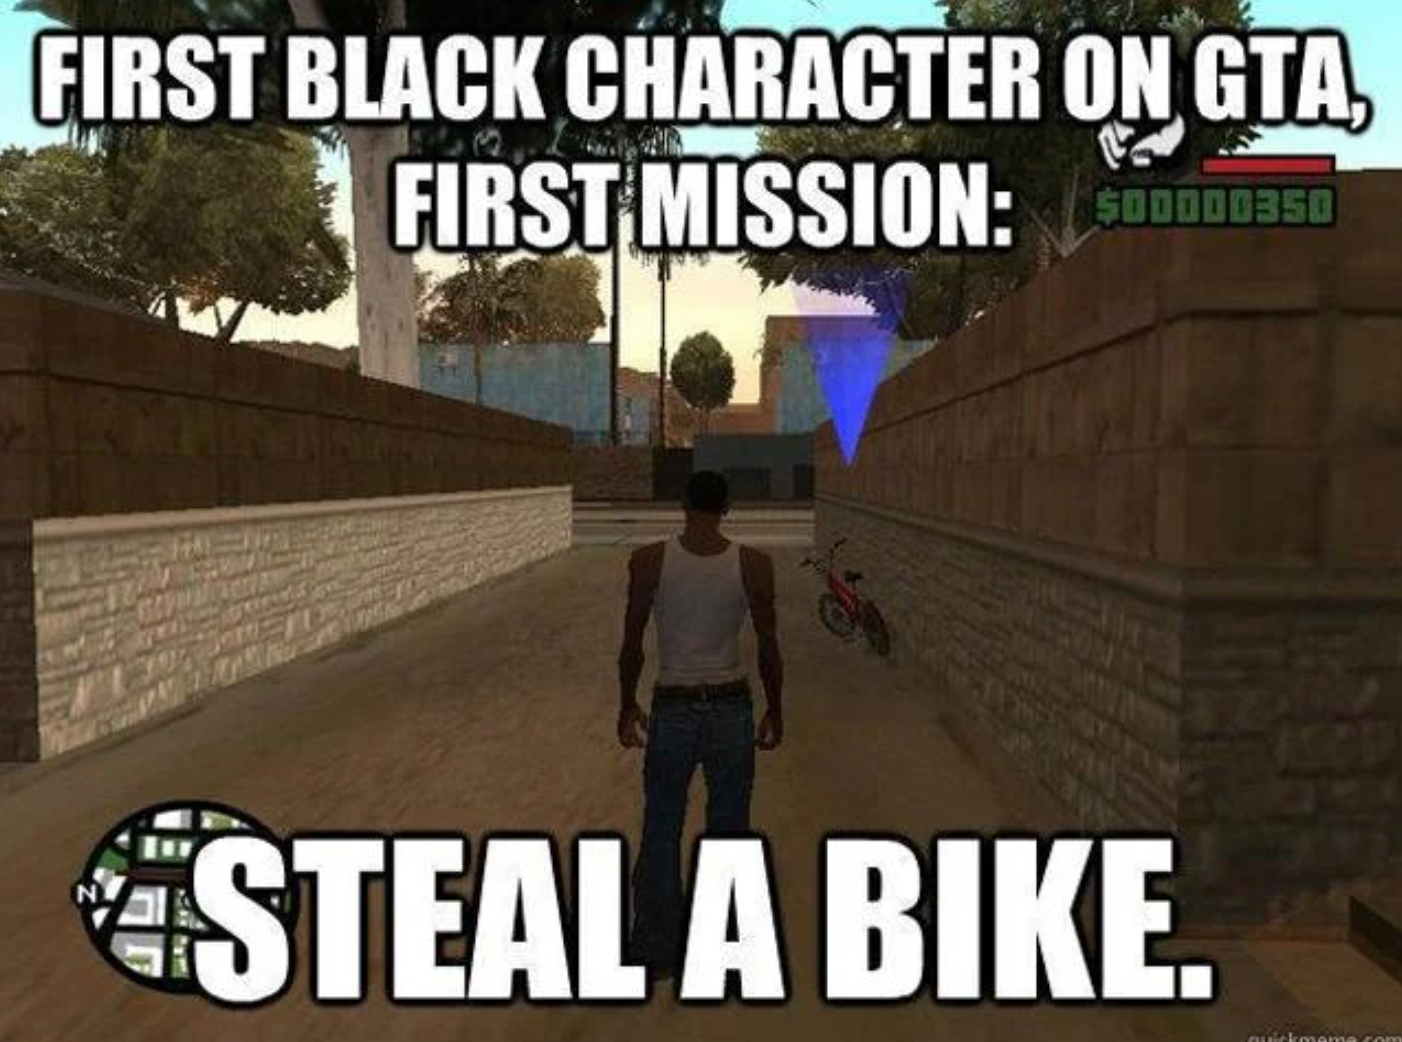 funny gaming memes - First Black Character On Gta First Mission $00000350 Steal A Bike.